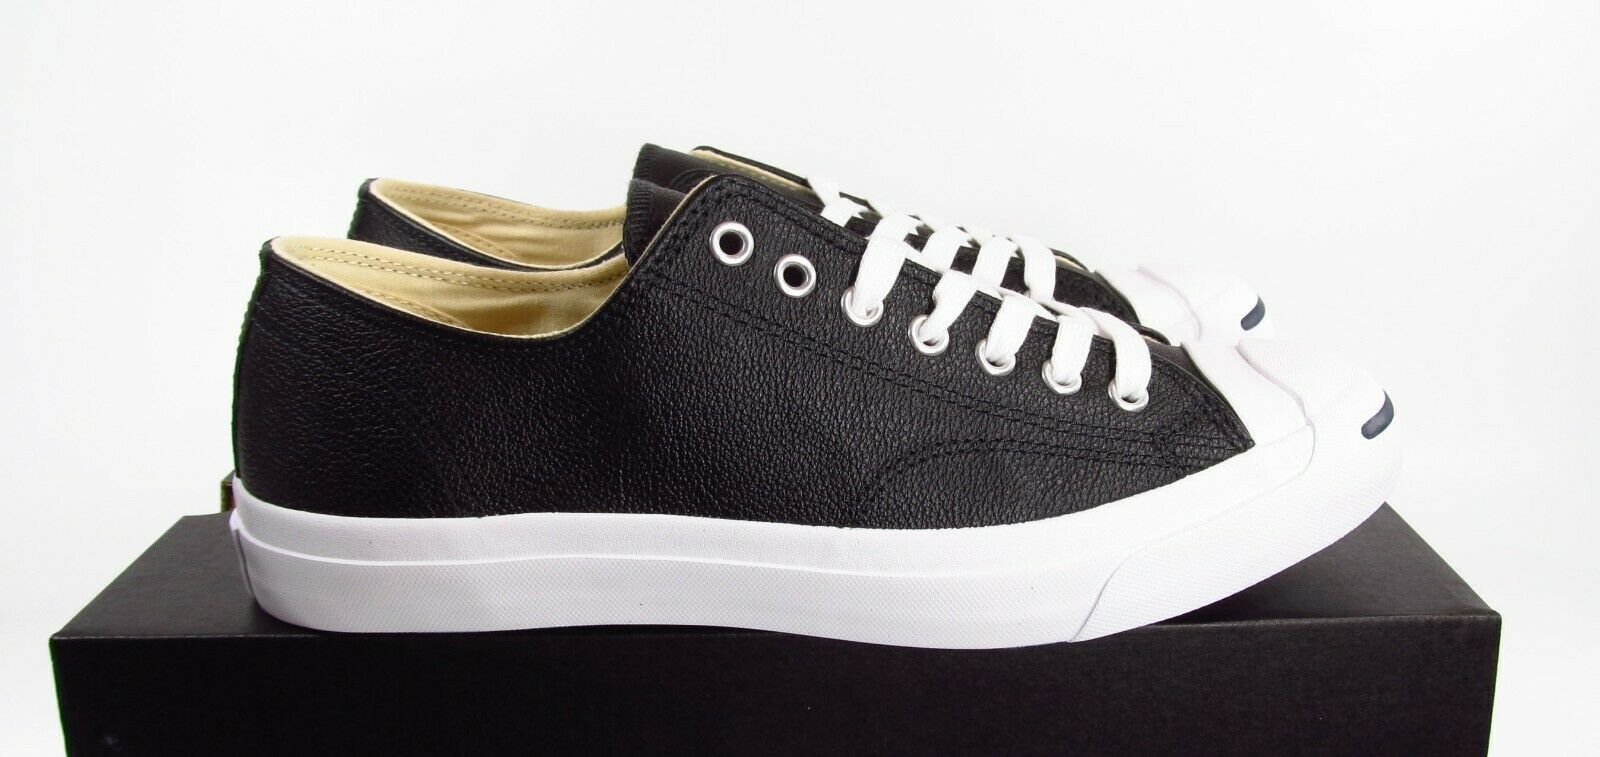 Converse Jack Purcell Black Leather Ox Low Top Sneaker 2018 Black Box ...